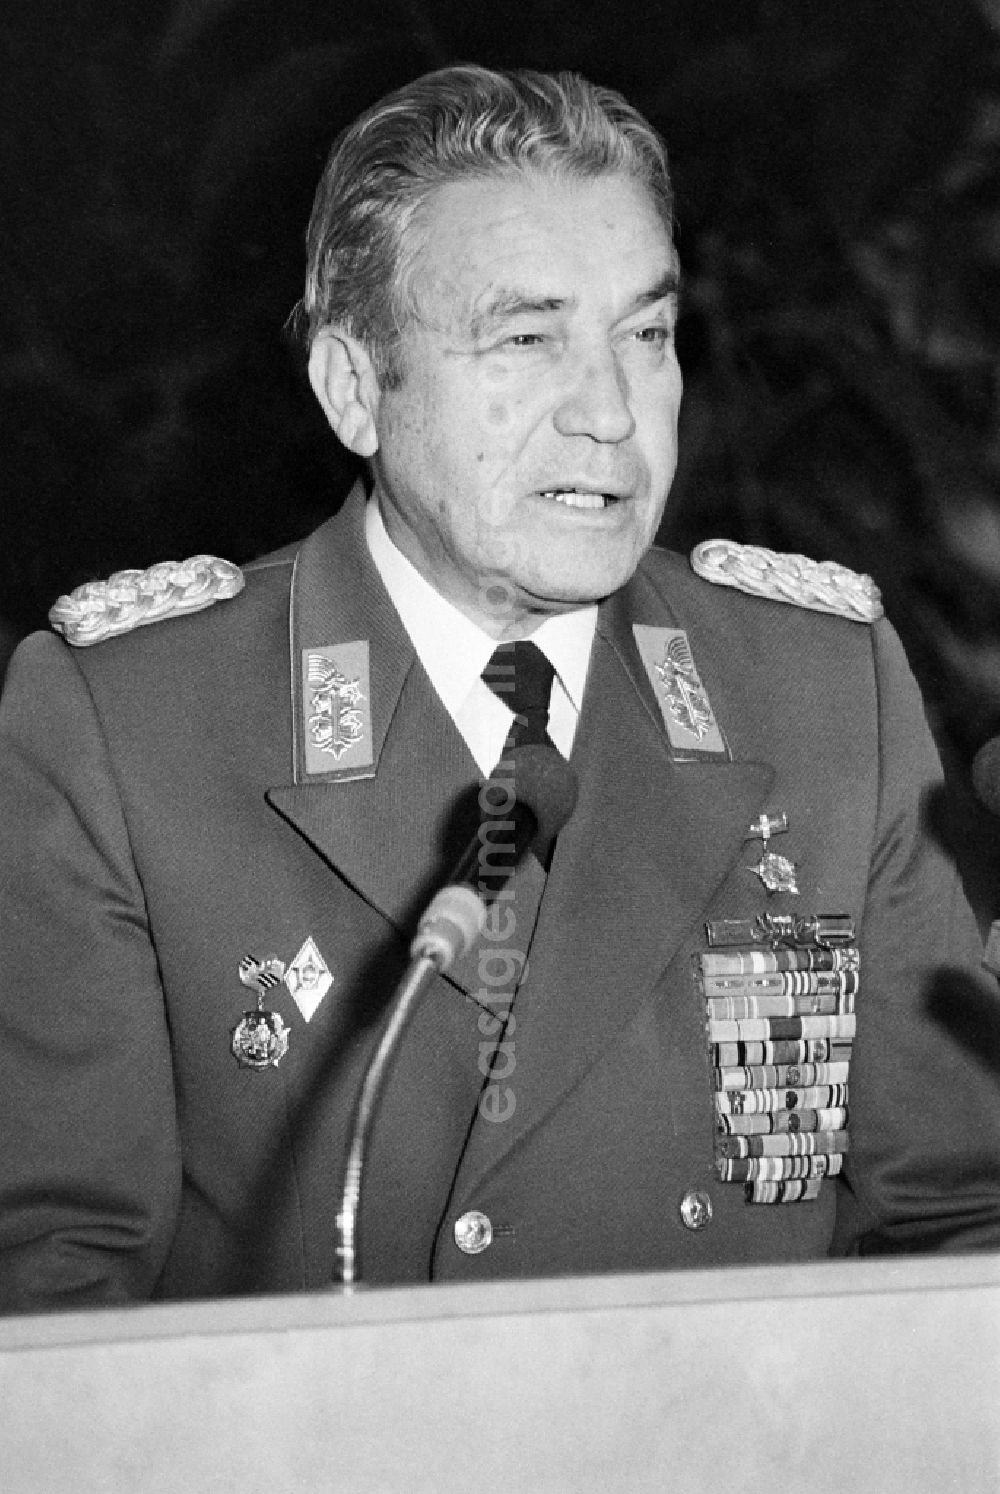 GDR photo archive: Strausberg - Army General Heinz Hoffmann during a speech at the Commanders' Meeting in the Ministry of Defence of the GDR in Strausberg in the state Brandenburg on the territory of the former GDR, German Democratic Republic